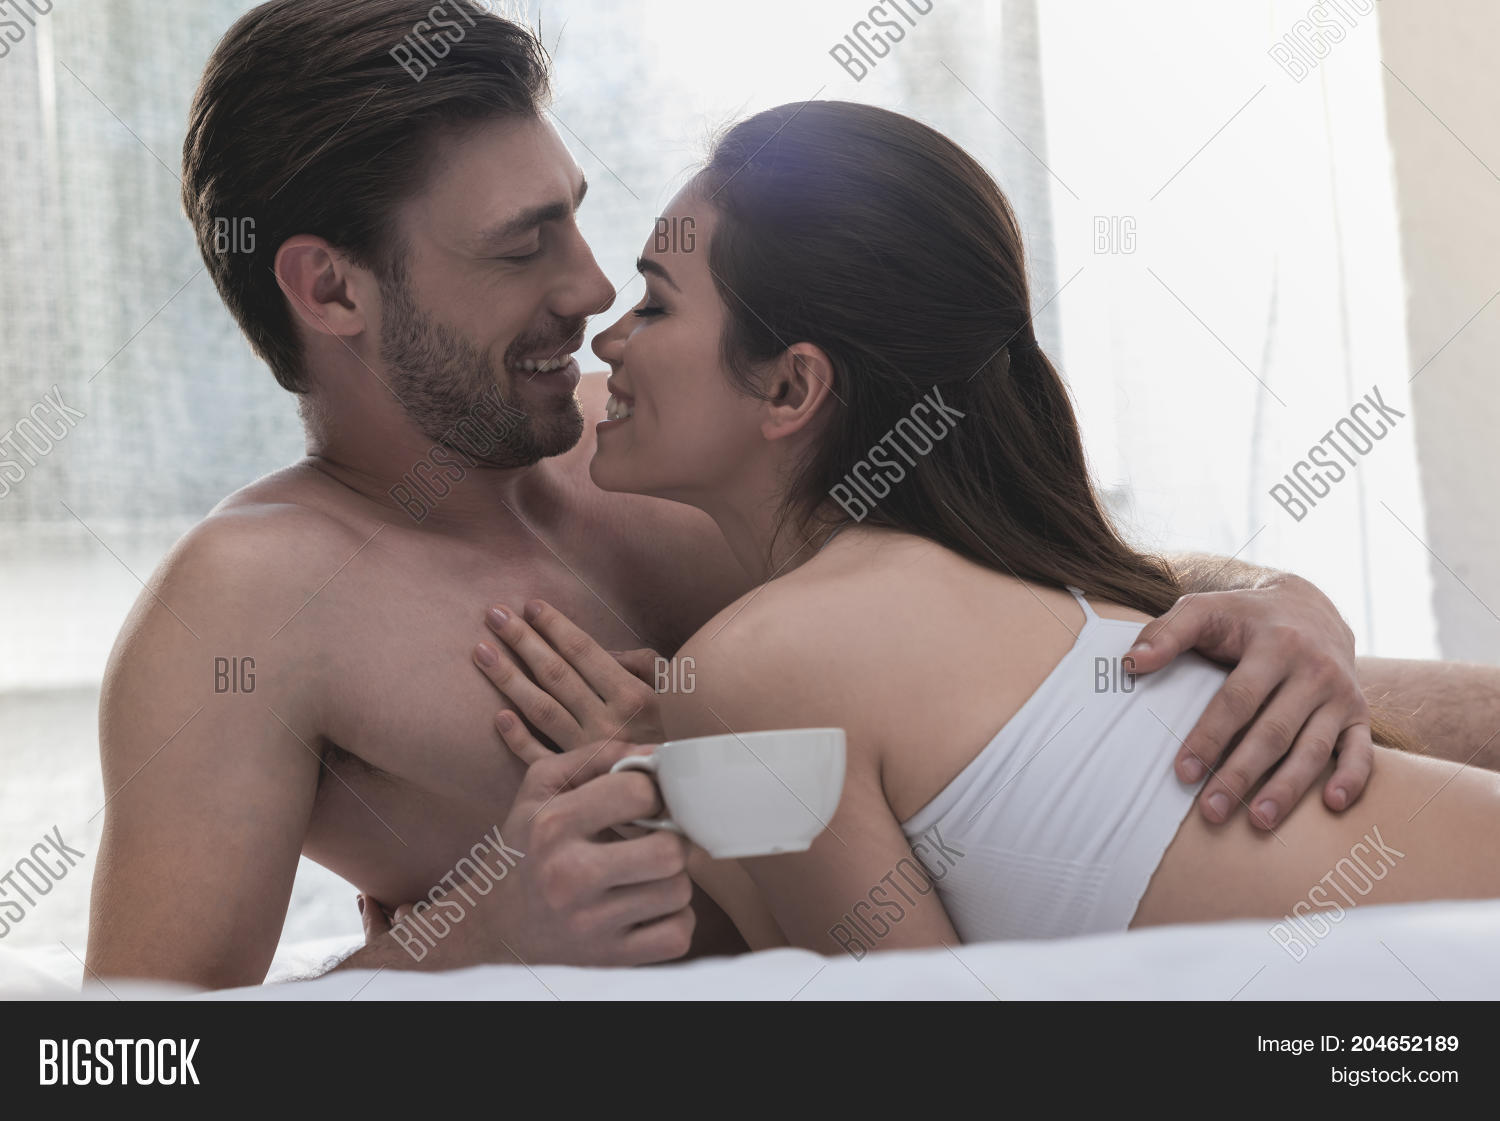 Best of Pictures of couples cuddling in bed